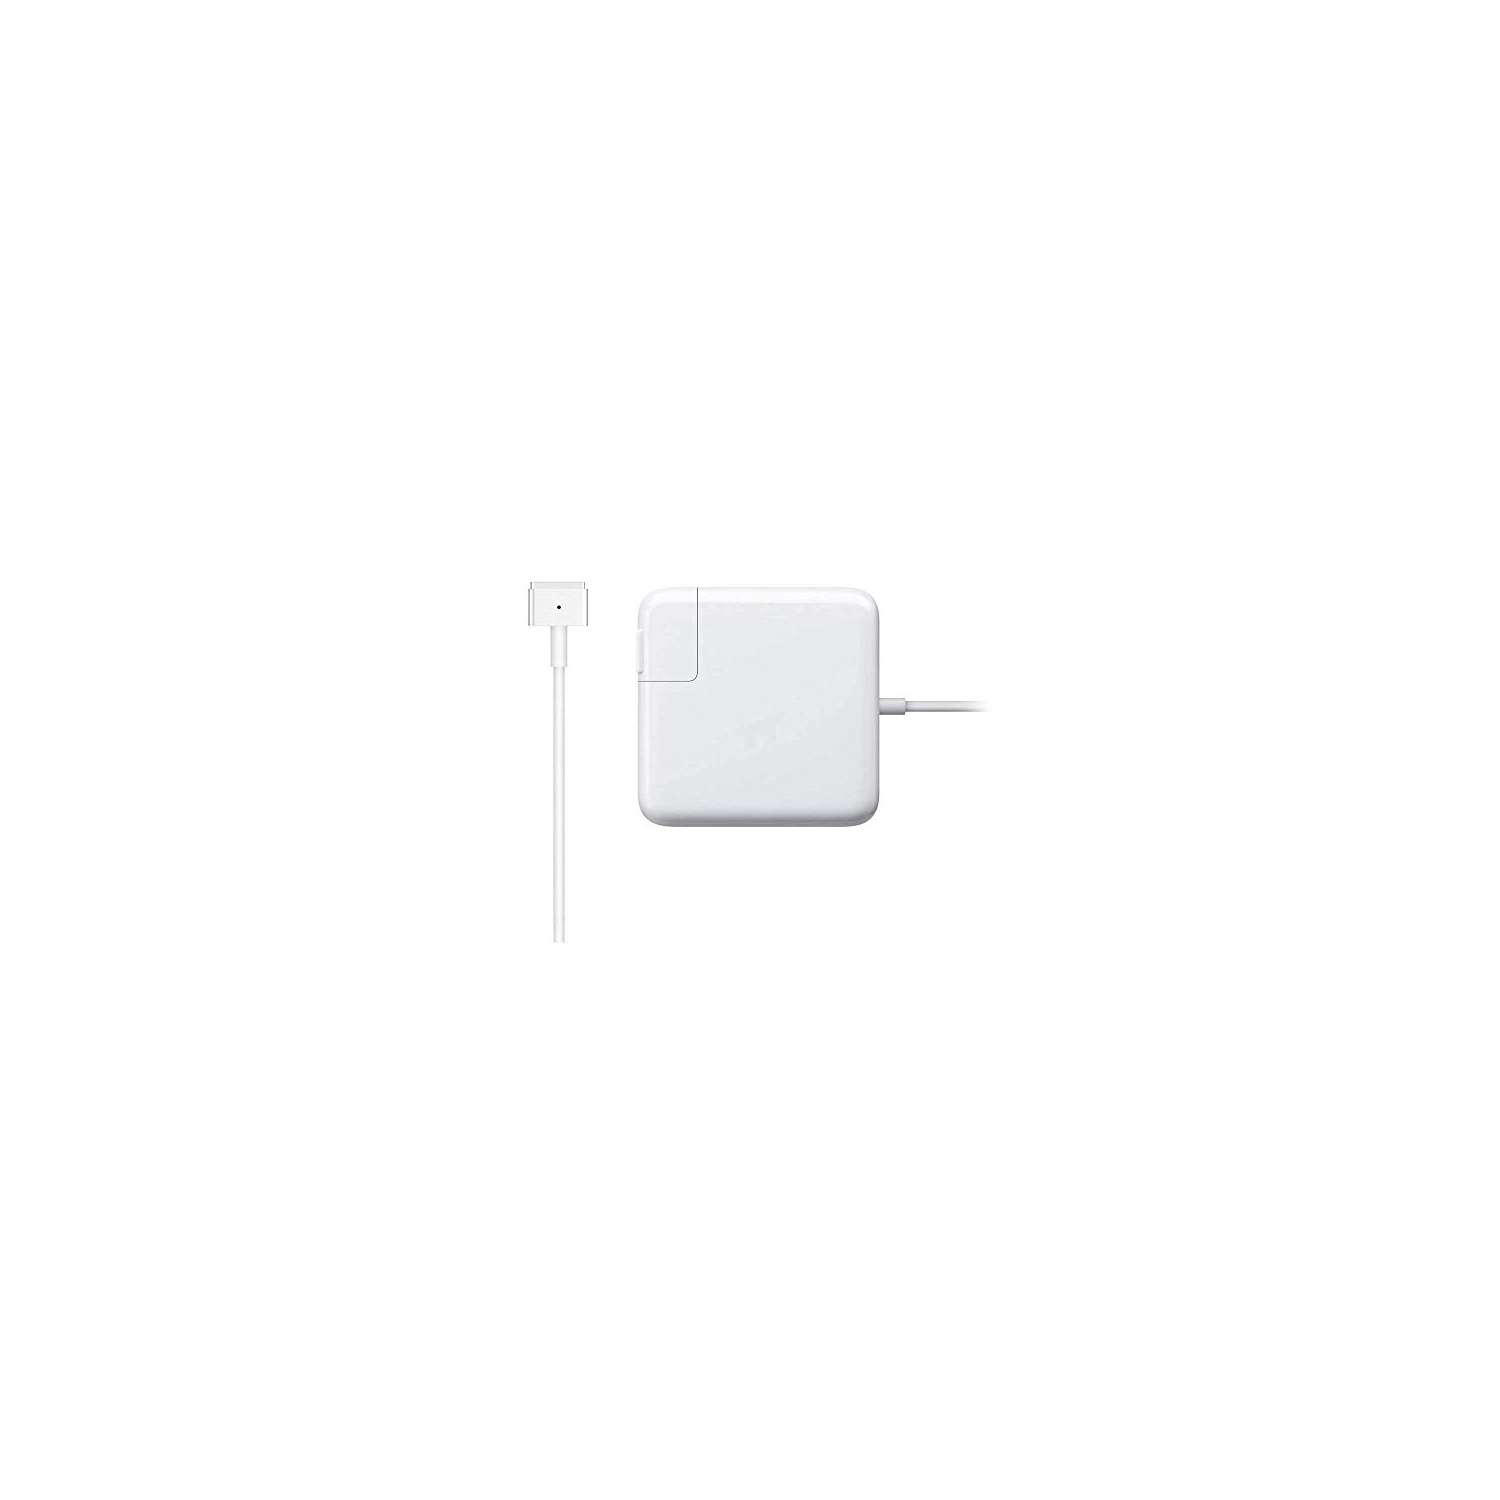 Mac Book Air Charger, AC 45W Magsafe 2 T-Tip Power Adapter Charger Replacement for MacBook Air 11/13 inch